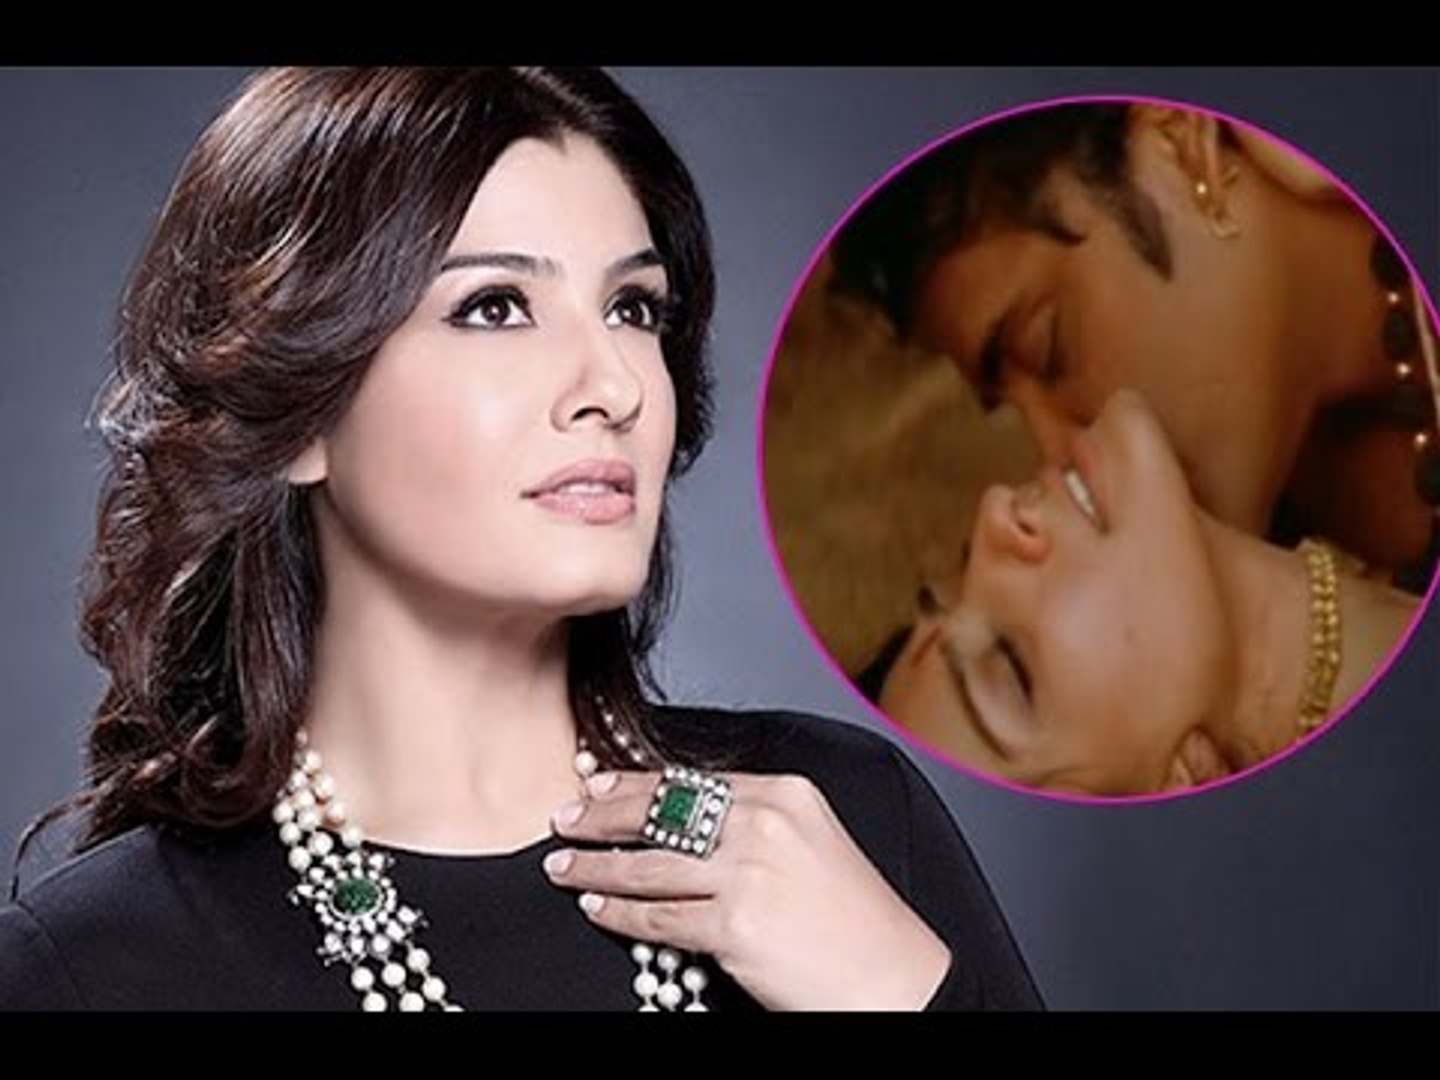 Raveena Tandon Xxx Hd Sex - Raveena Tandon Says Sex is Over Rated in Bollywood - video Dailymotion